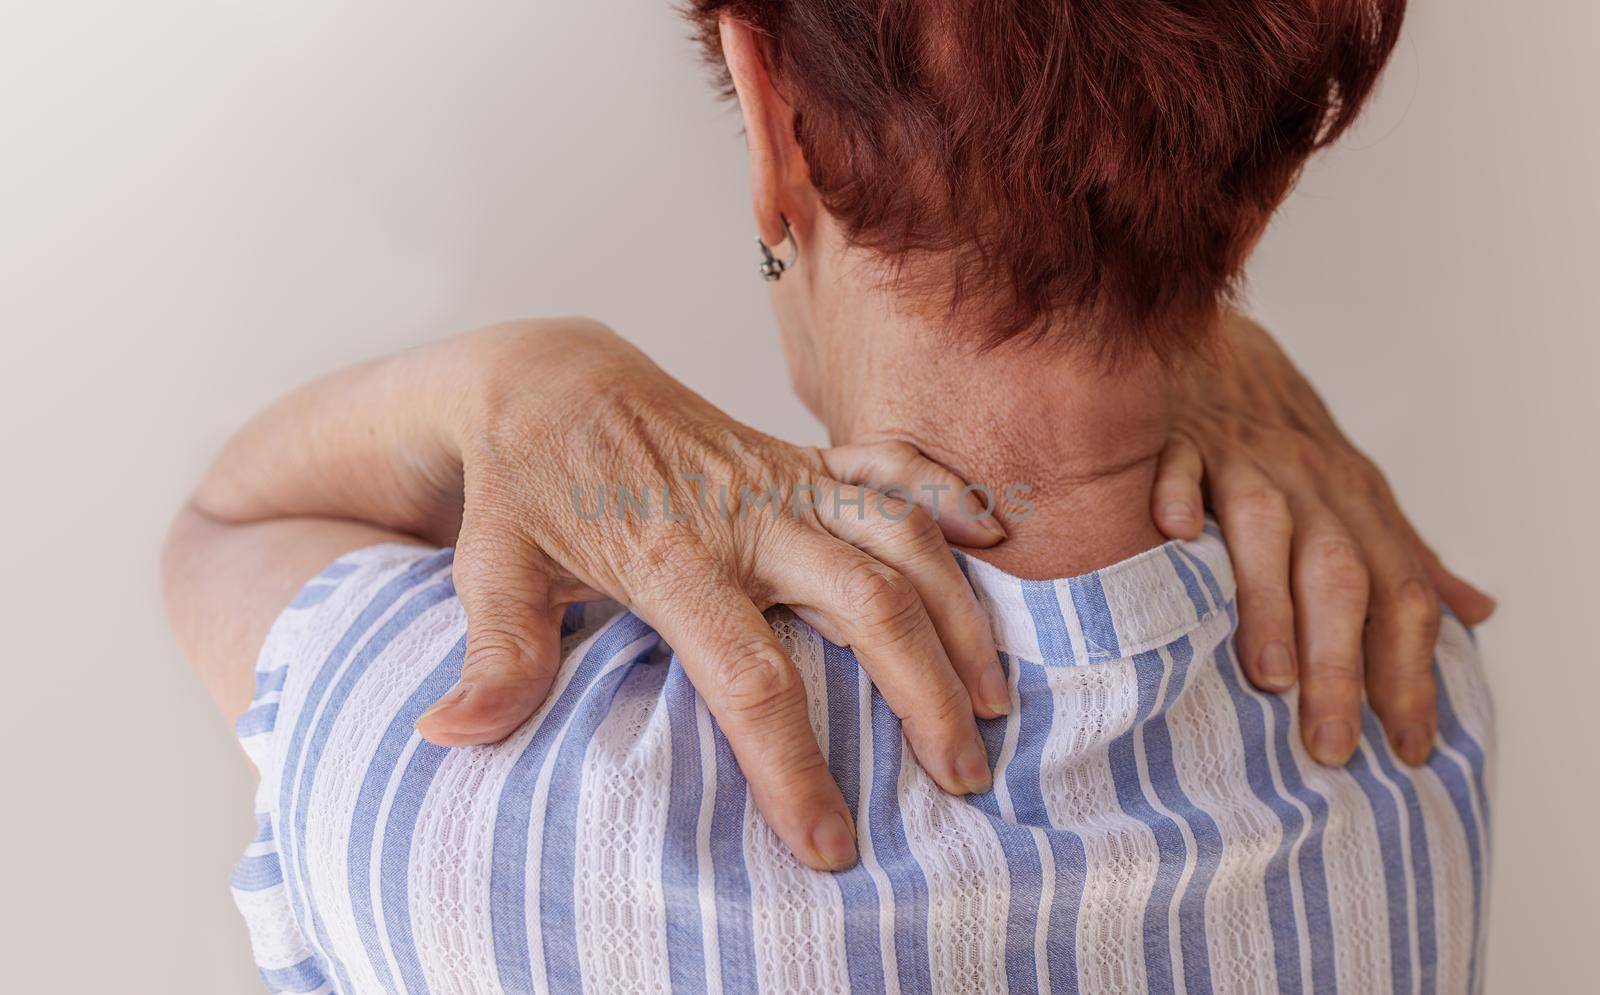 Close-up massage technique, neck and collar zone. Spinal problems and neurological diseases in the elderly. Hands of an old man doing massage on his own. A woman in a blue shirt stands with her back